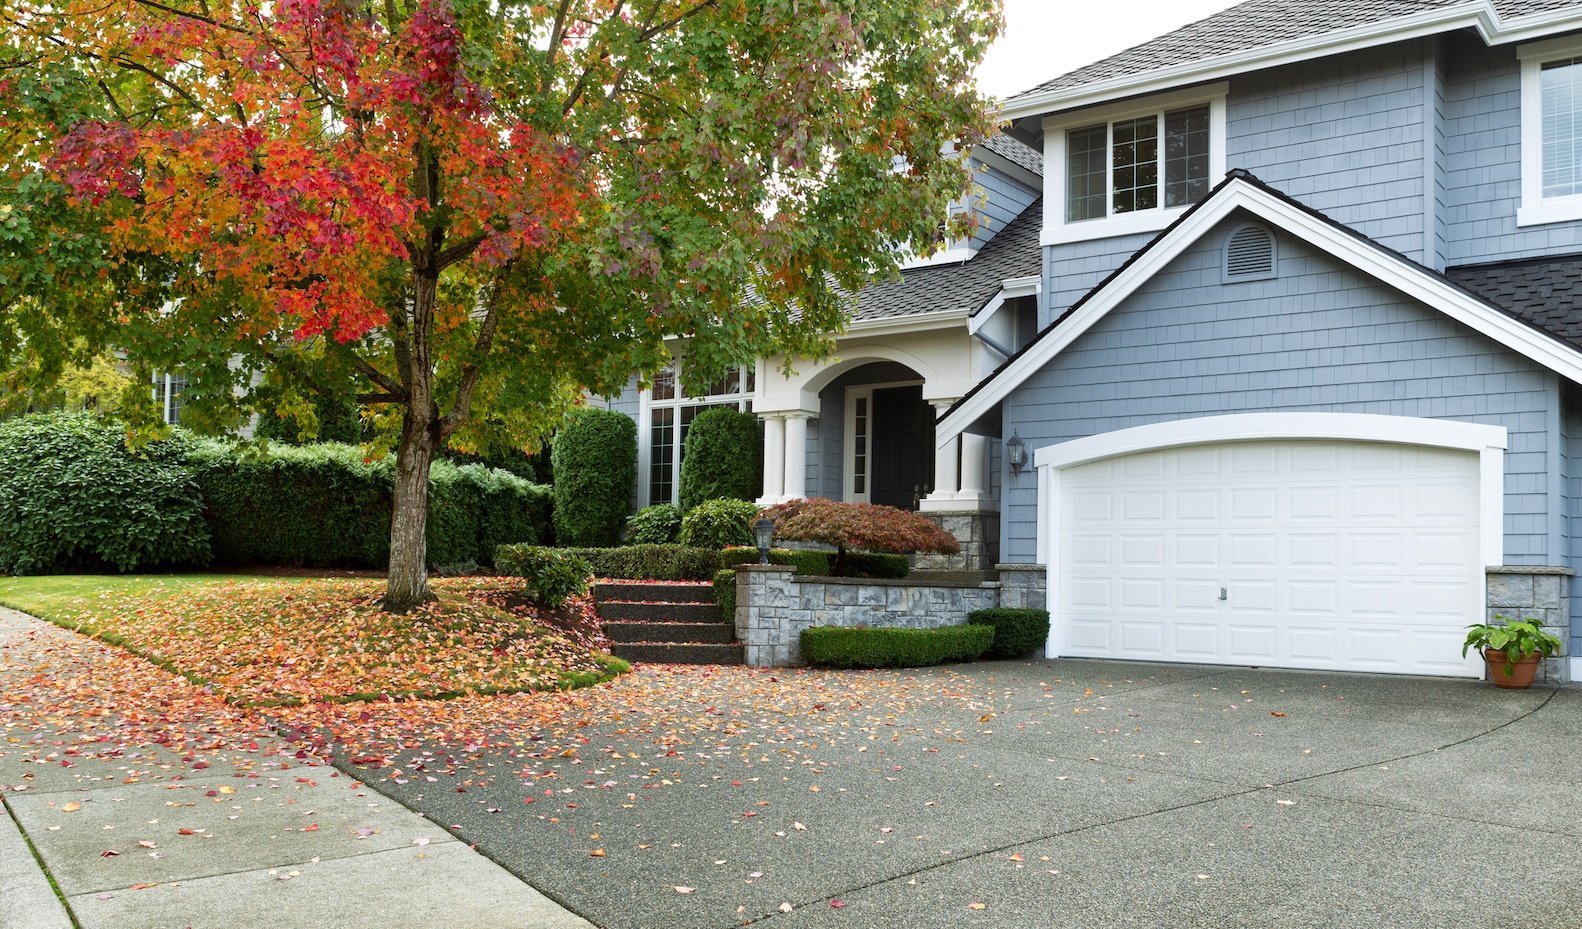 Front yard of house with autumn trees